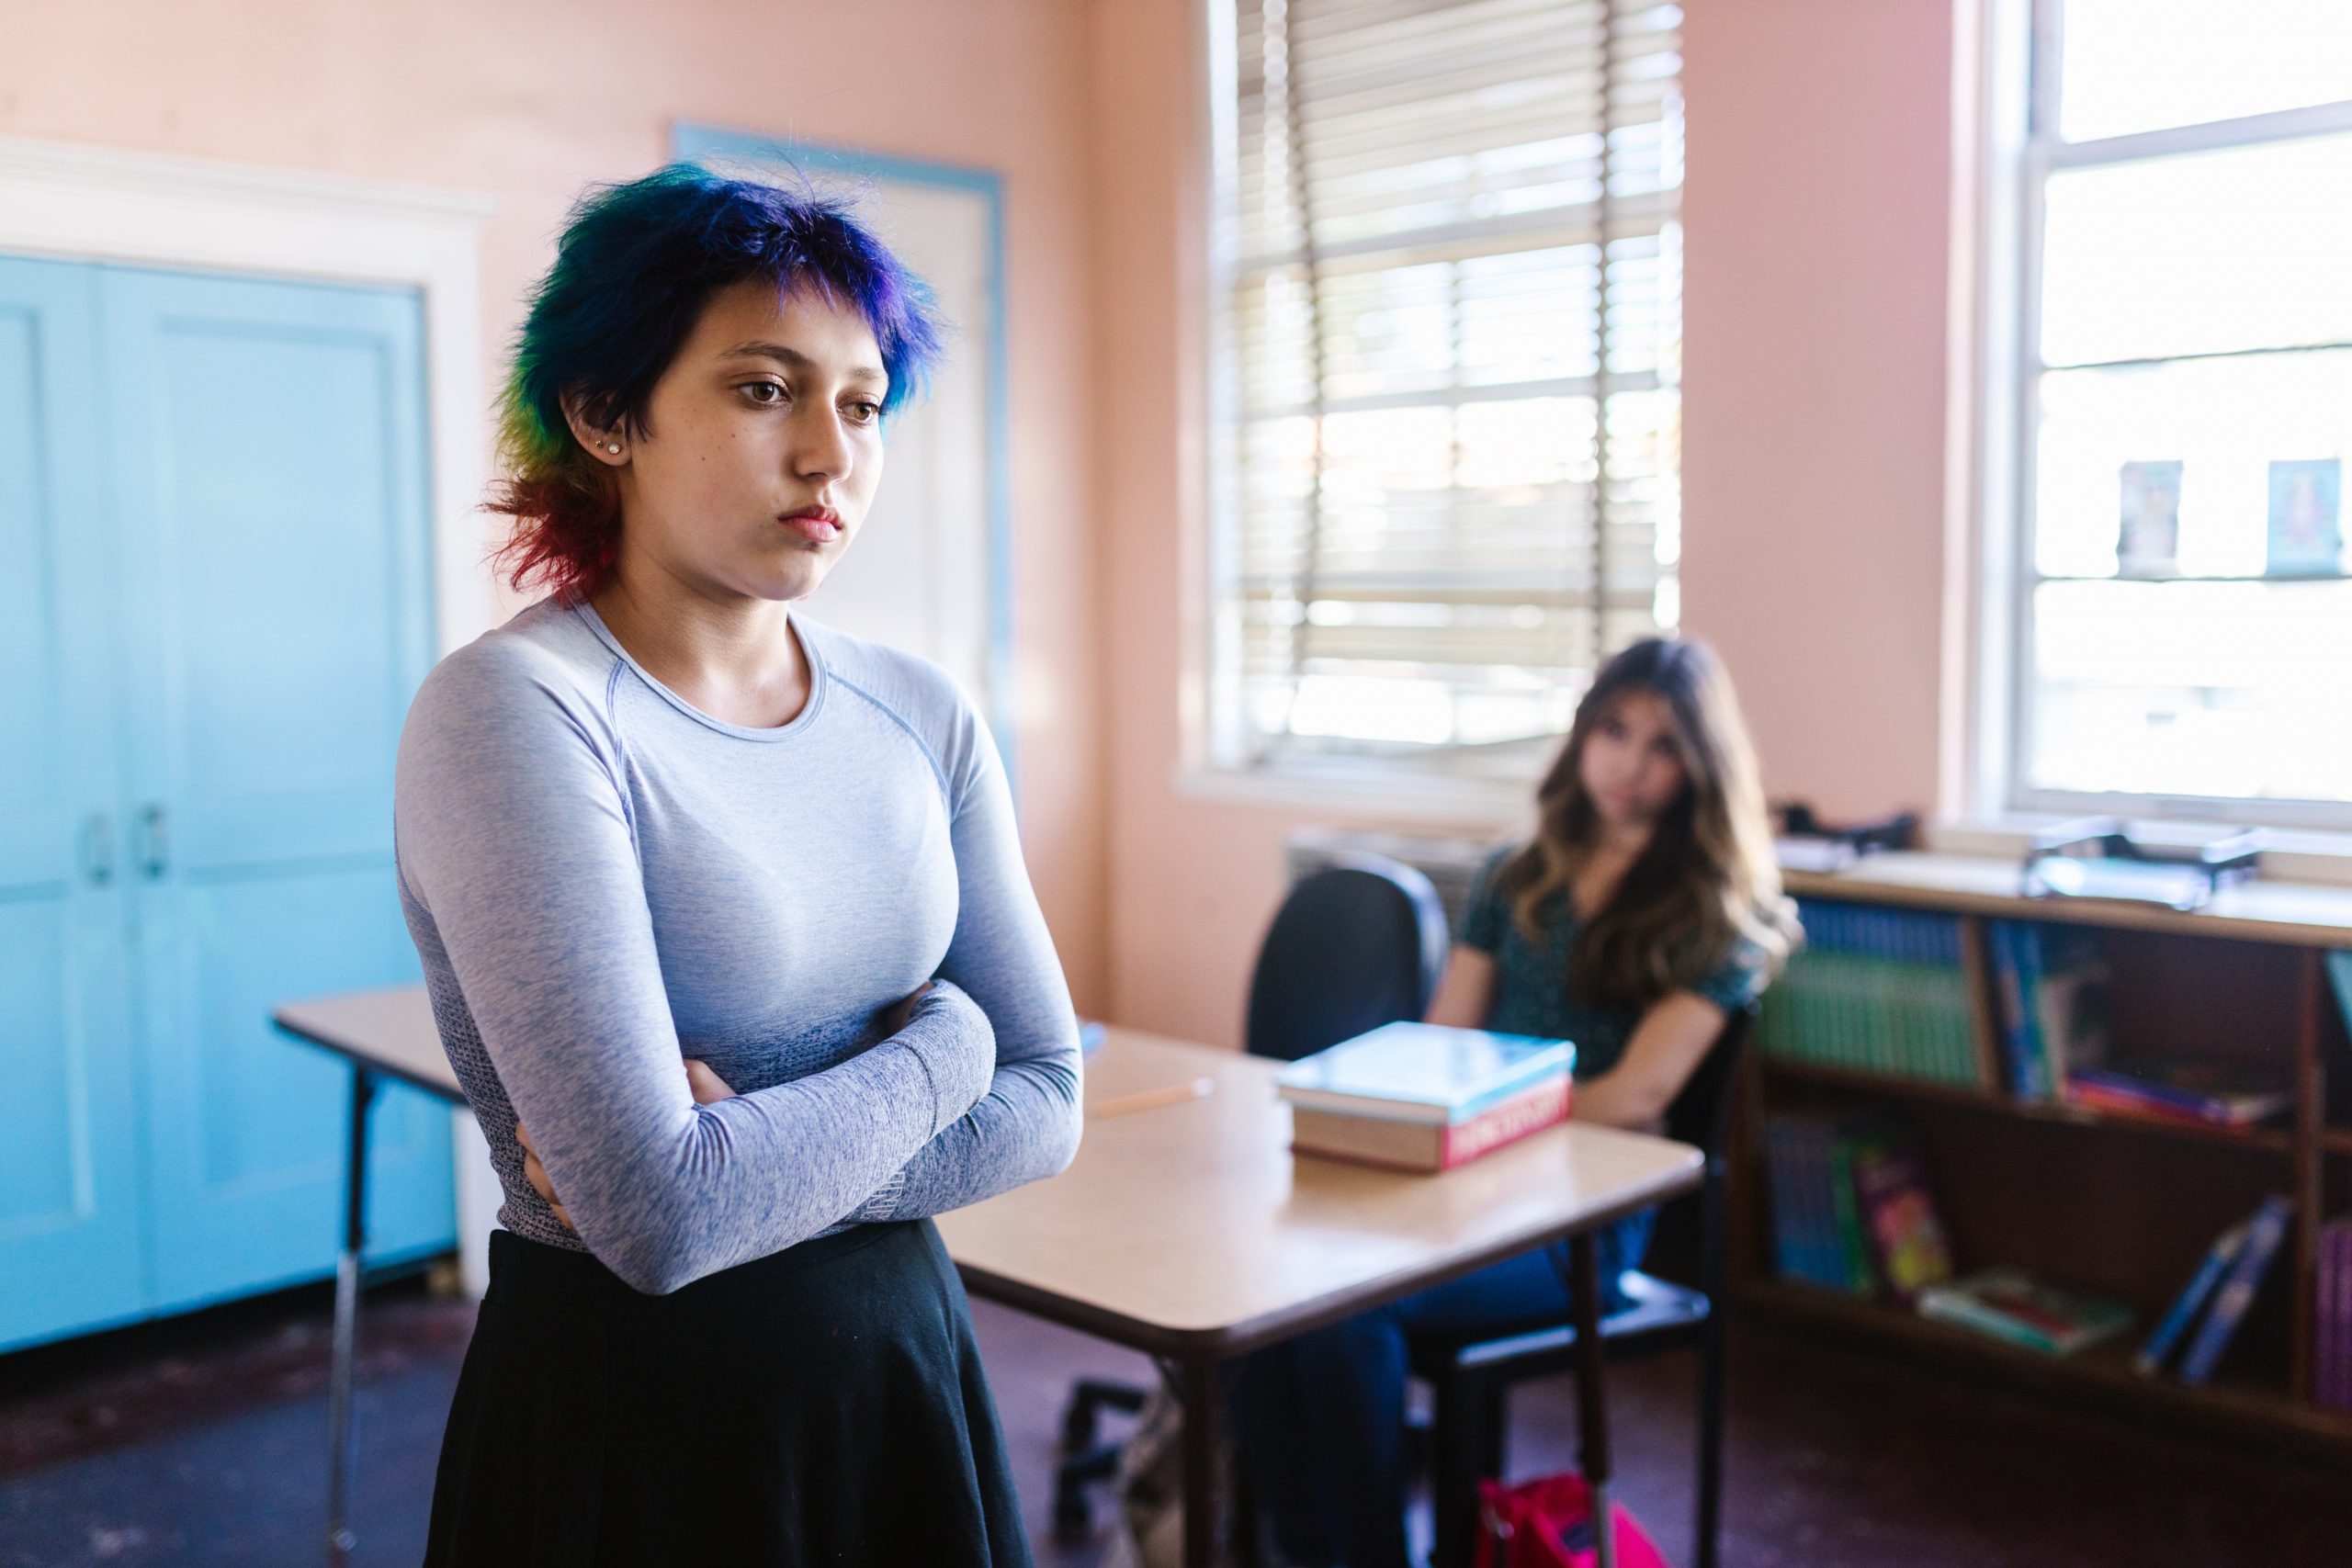 student standing in classroom with arms crossed and facial expression of sadness. second student in background with books on desk staring at student standing up. she has a somber looking facial expression.